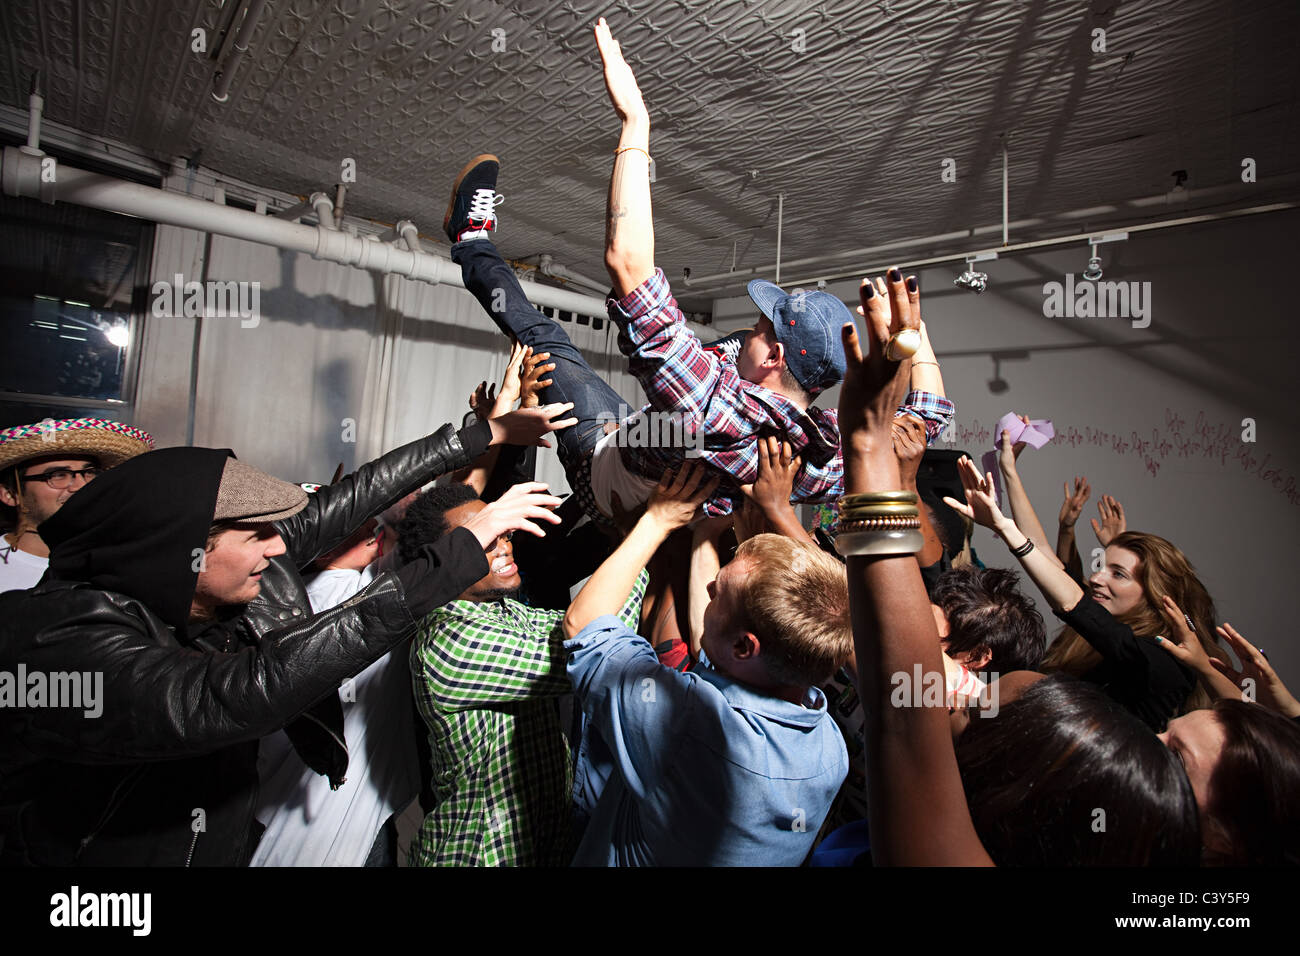 Man crowd surfing at party Stock Photo